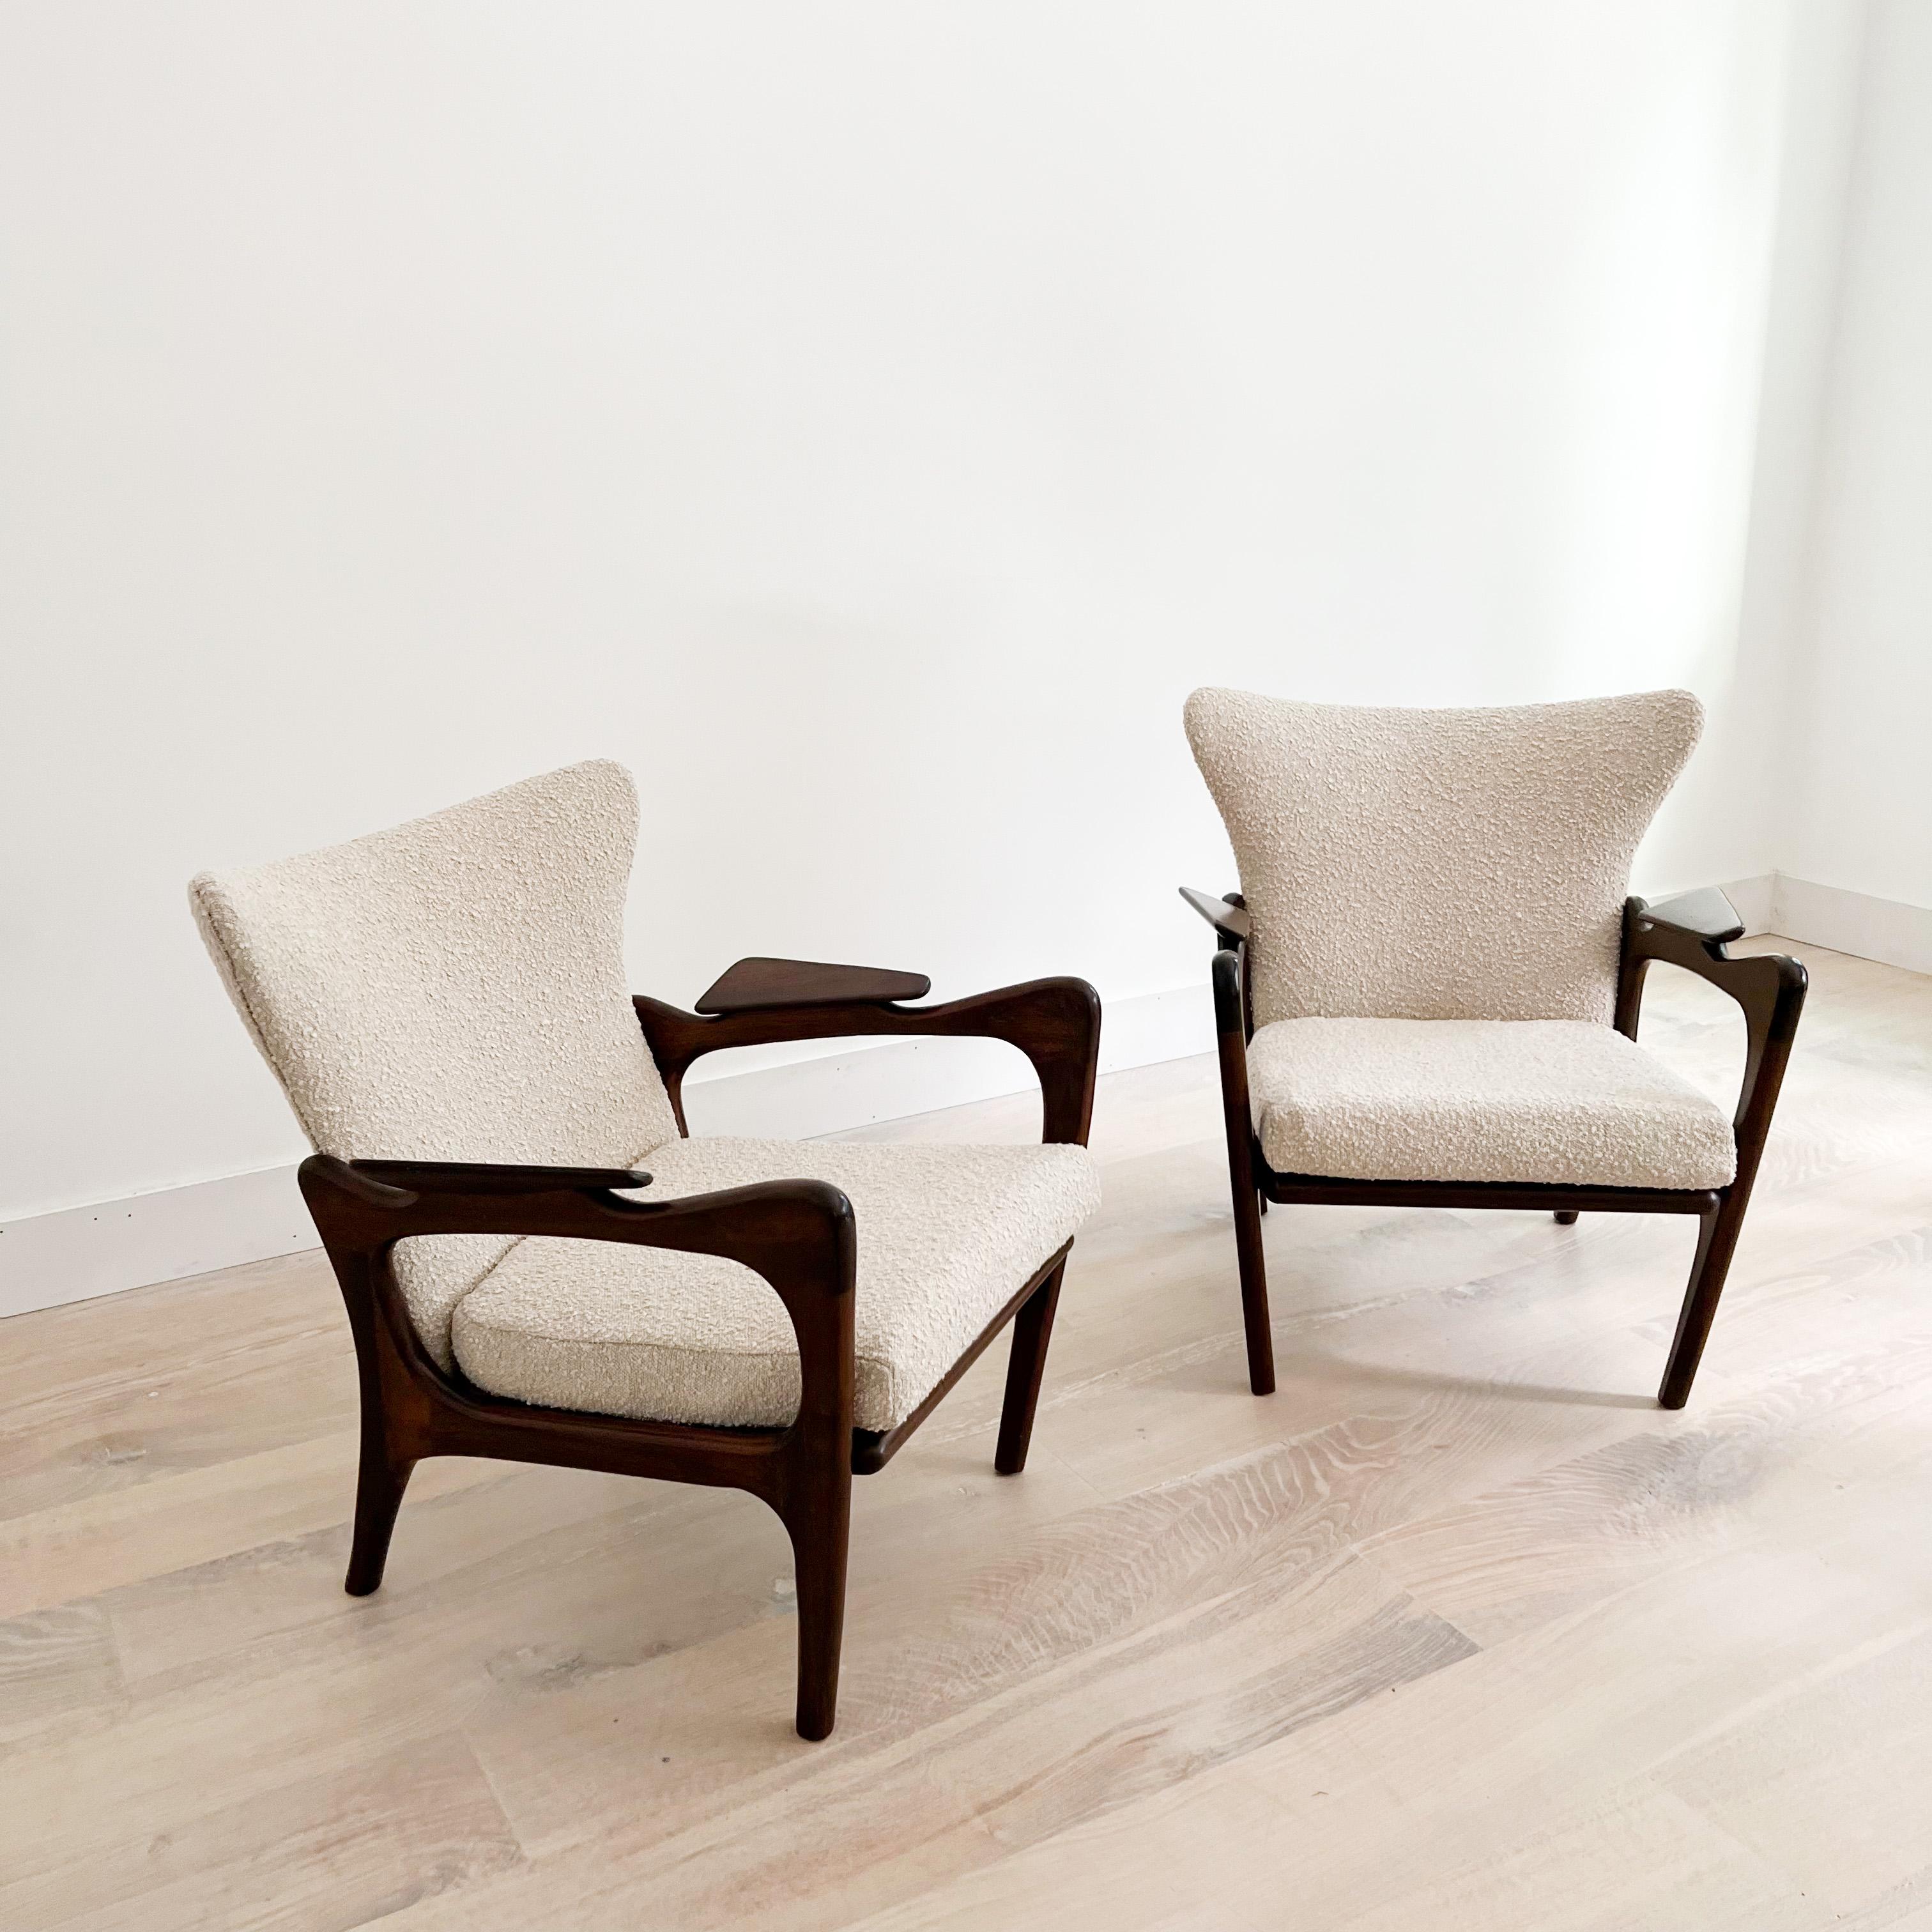 Pair of Mid-Century Modern wingback lounge chairs designed by Adrian Pearsall for Craft Associates. The sculpted solid walnut wood frames are in good condition overall with only light scuffing/scratching from age appropriate wear. New professional